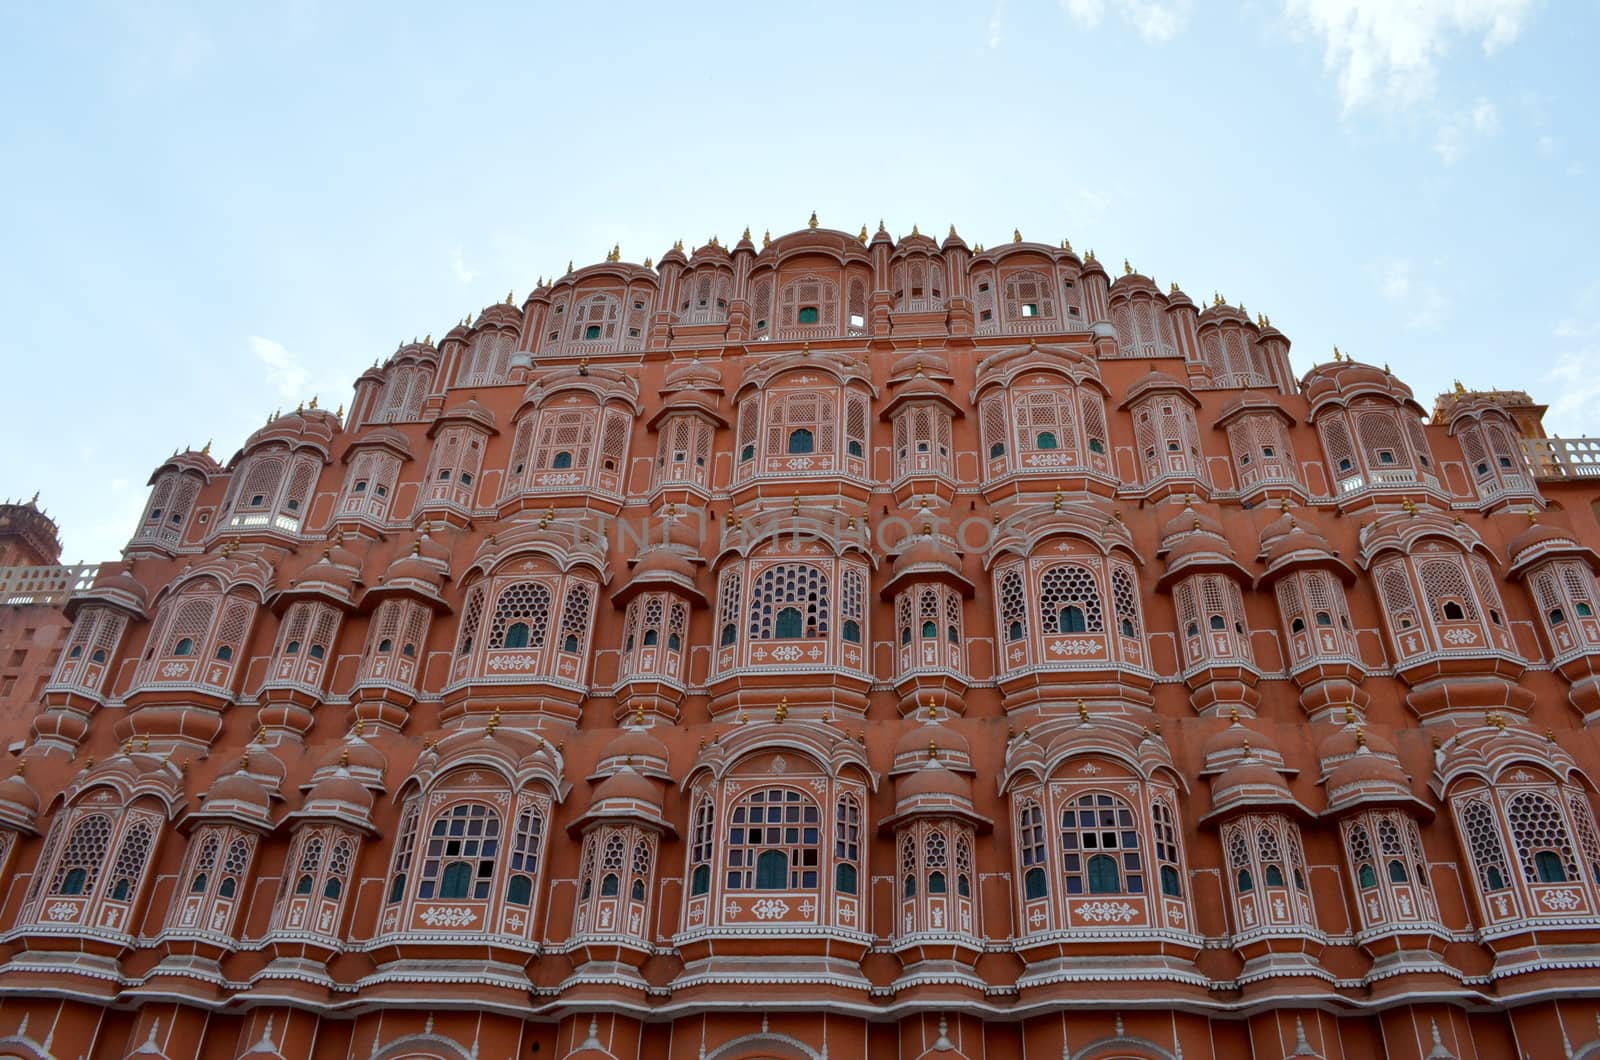 Low angle shot of Hawa Mahal from across the street. Hawa Mahal is constructed of red and pink sandstone. The structure was built in 1799 by Maharaja Sawai Pratap Singh in Jaipur, Rajasthan, India.